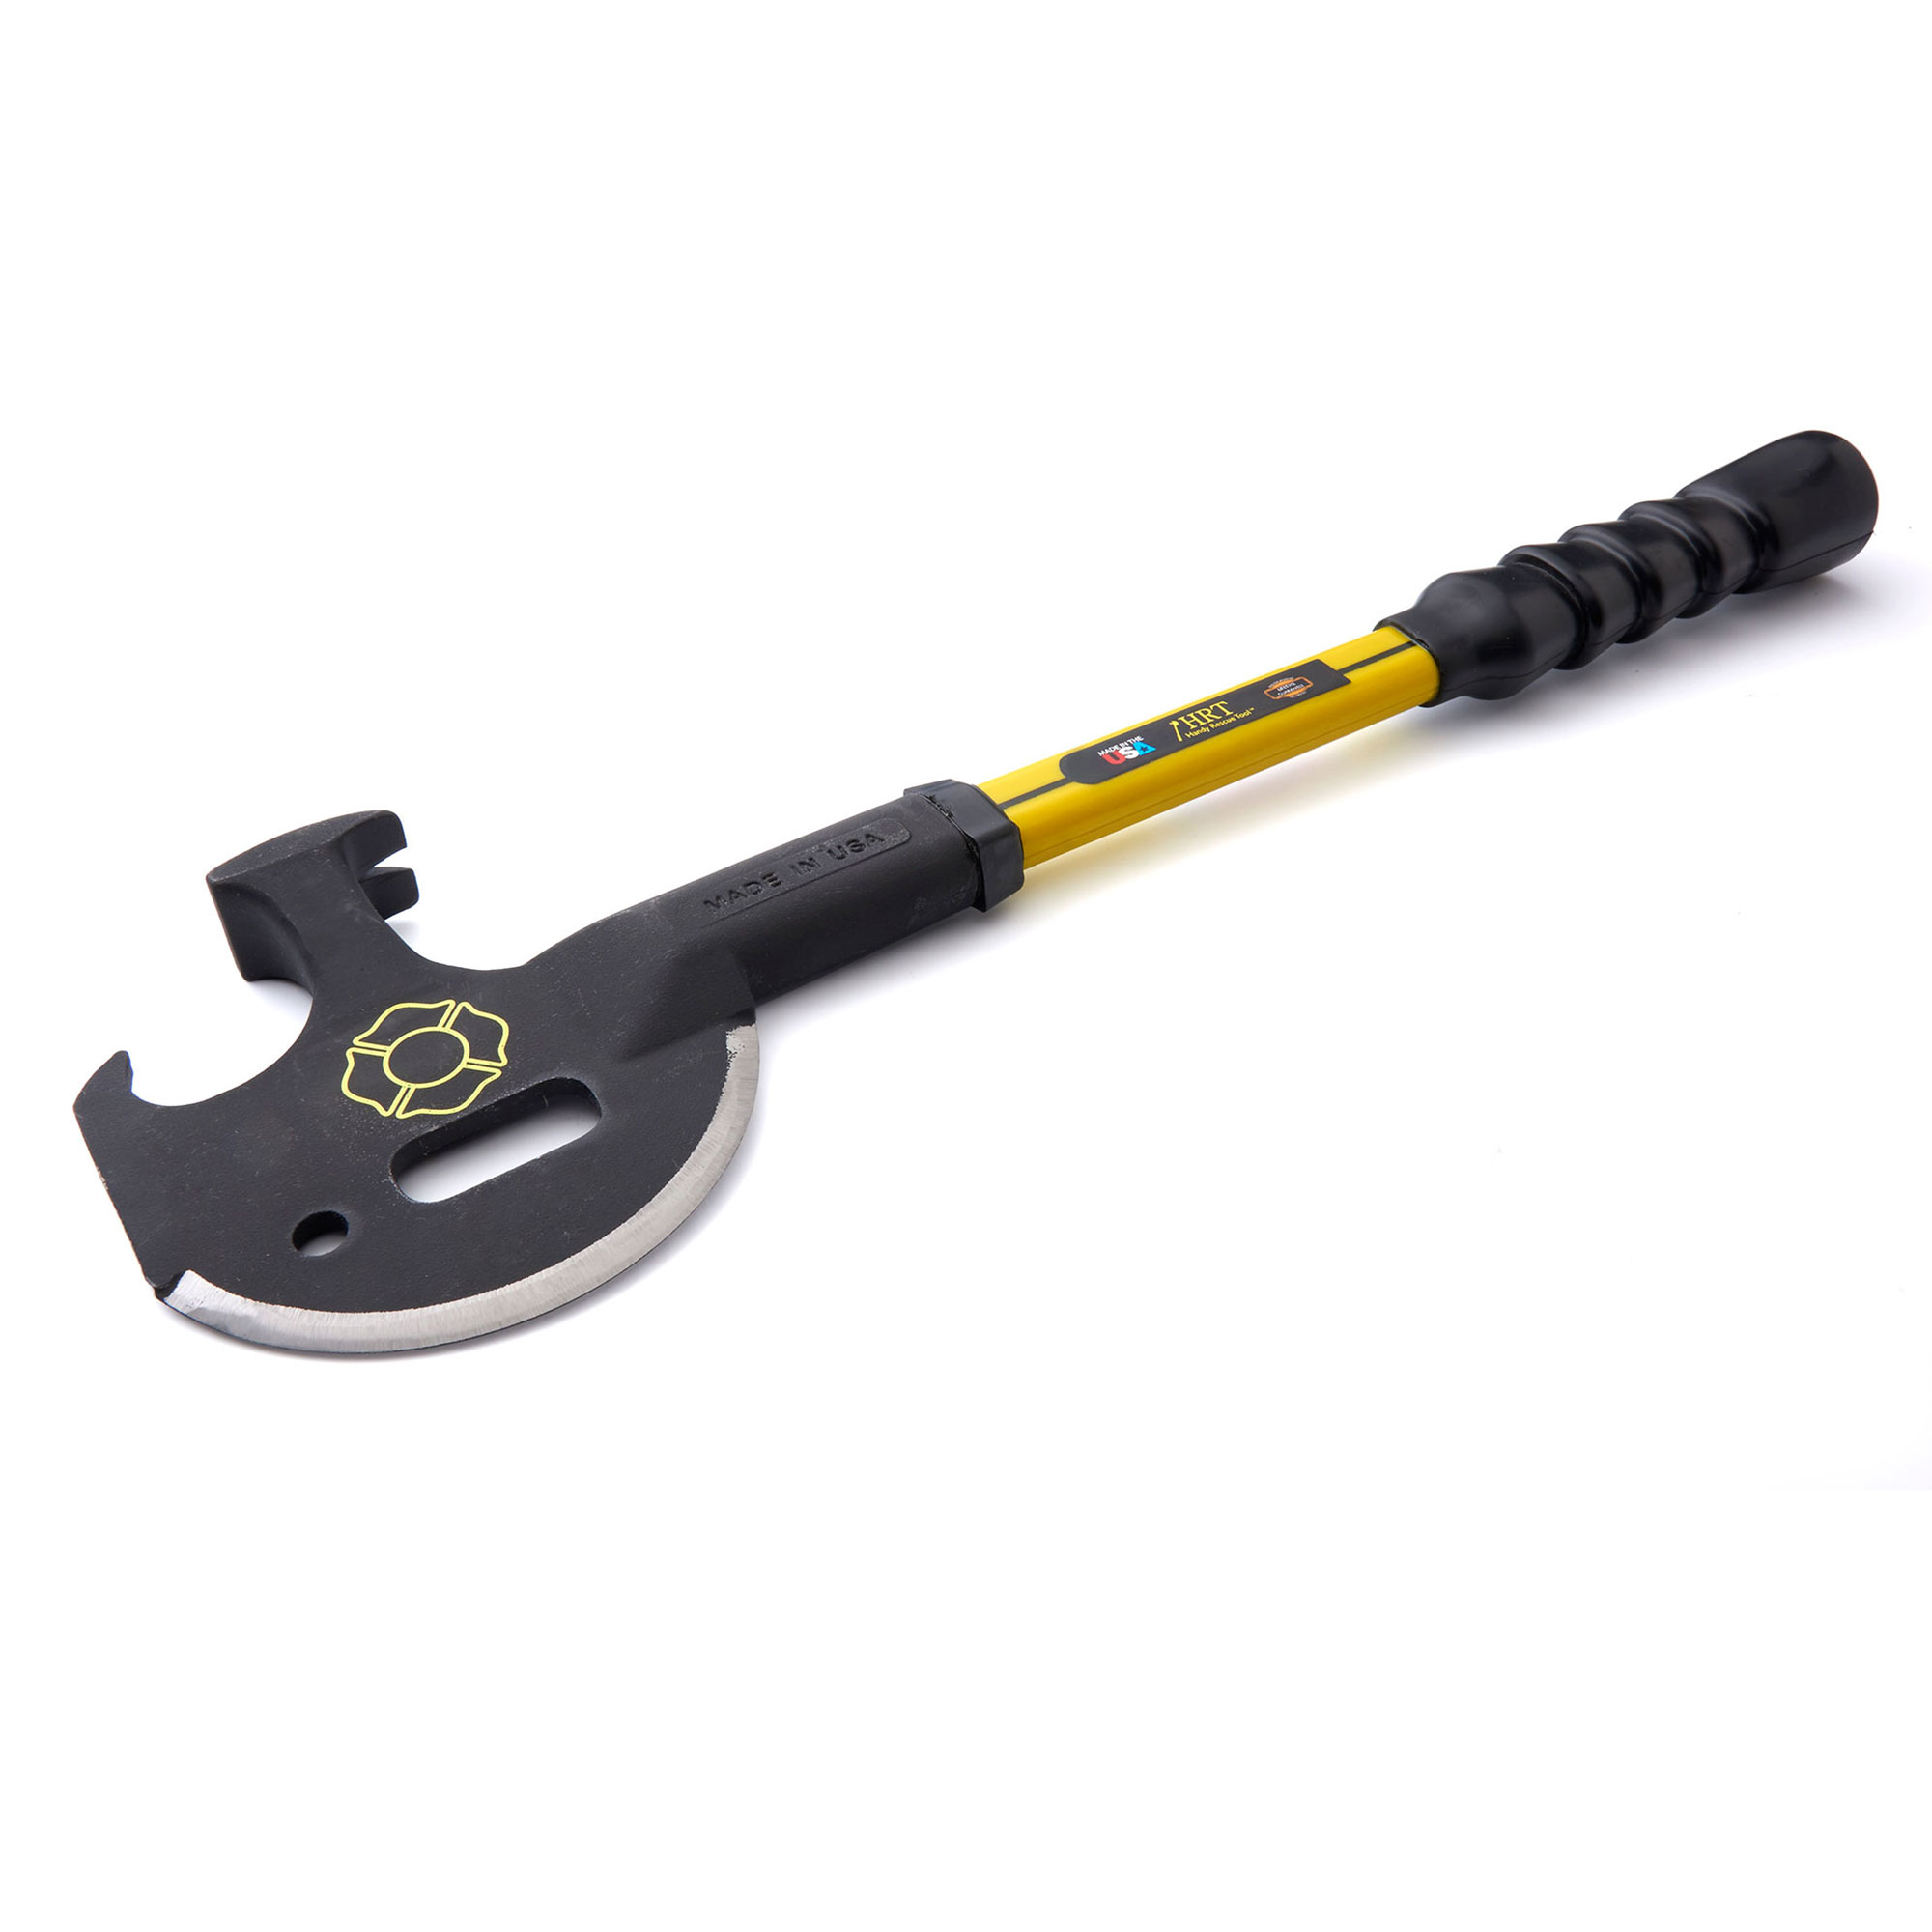 Innovation Factory Handy Rescue Tool ? Professional Fire And Rescue Tool